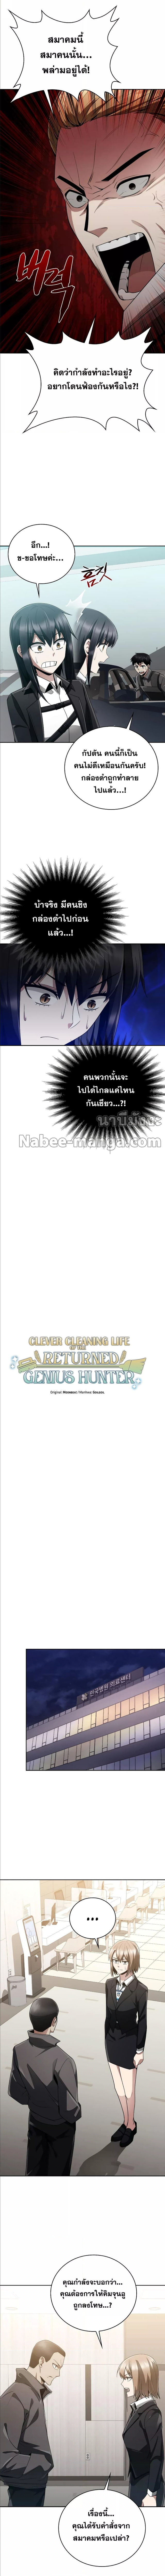 Clever Cleaning Life Of The Returned Genius Hunter 21 (3)